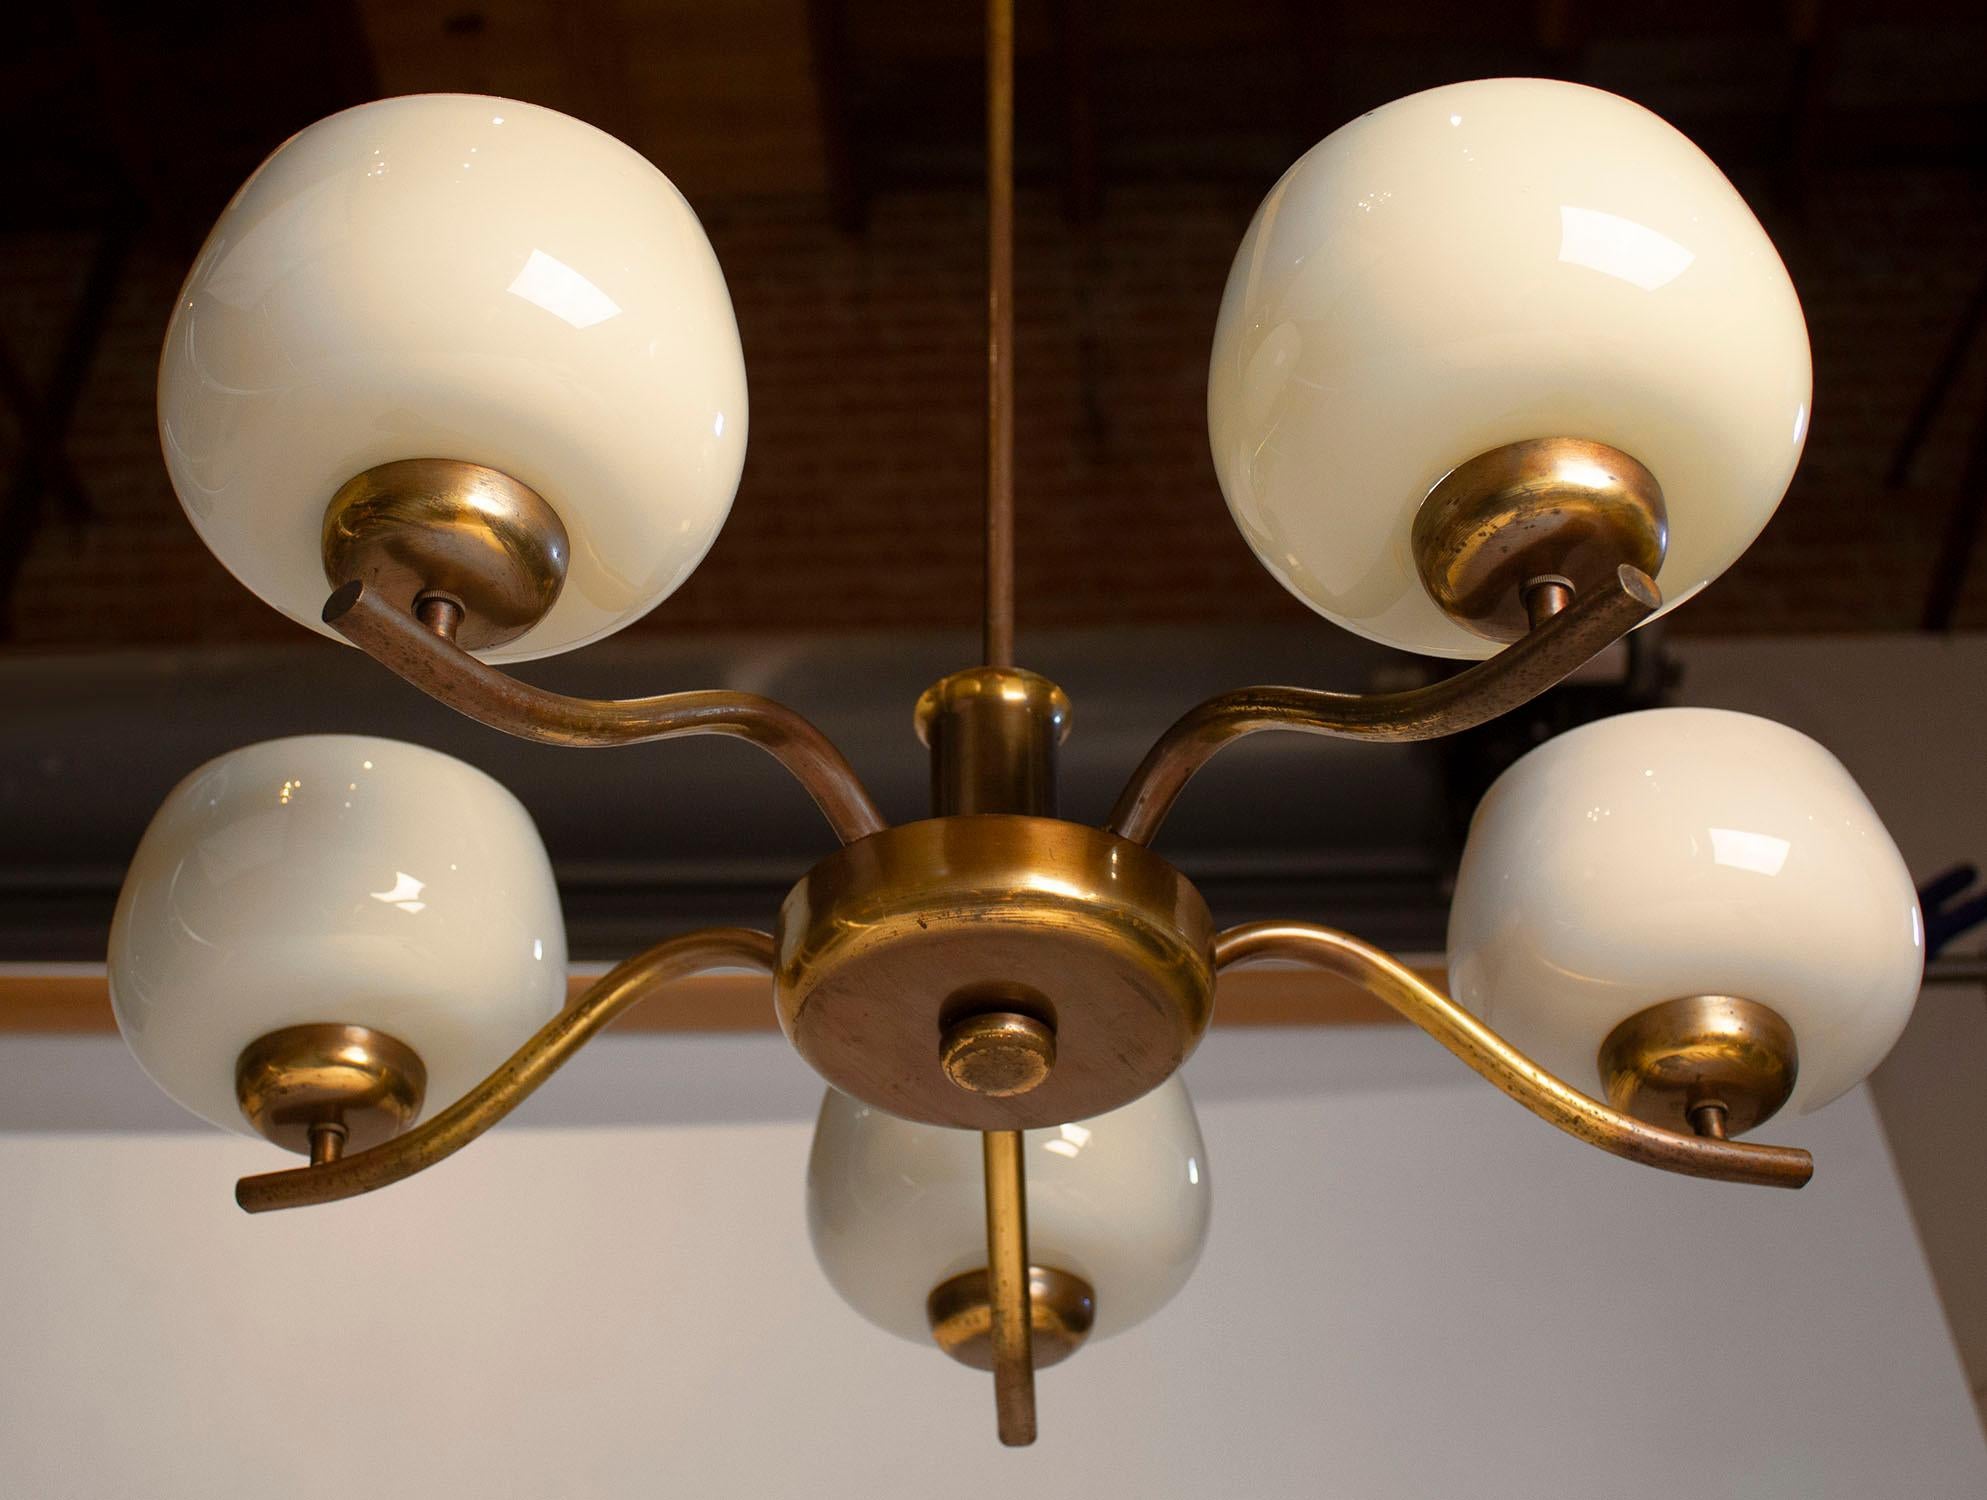 Blown glass and brass chandelier designed by Paavo Tynell for Taito Oy in the 1940s.

Each shade measures 6 diameter x 3.5 height